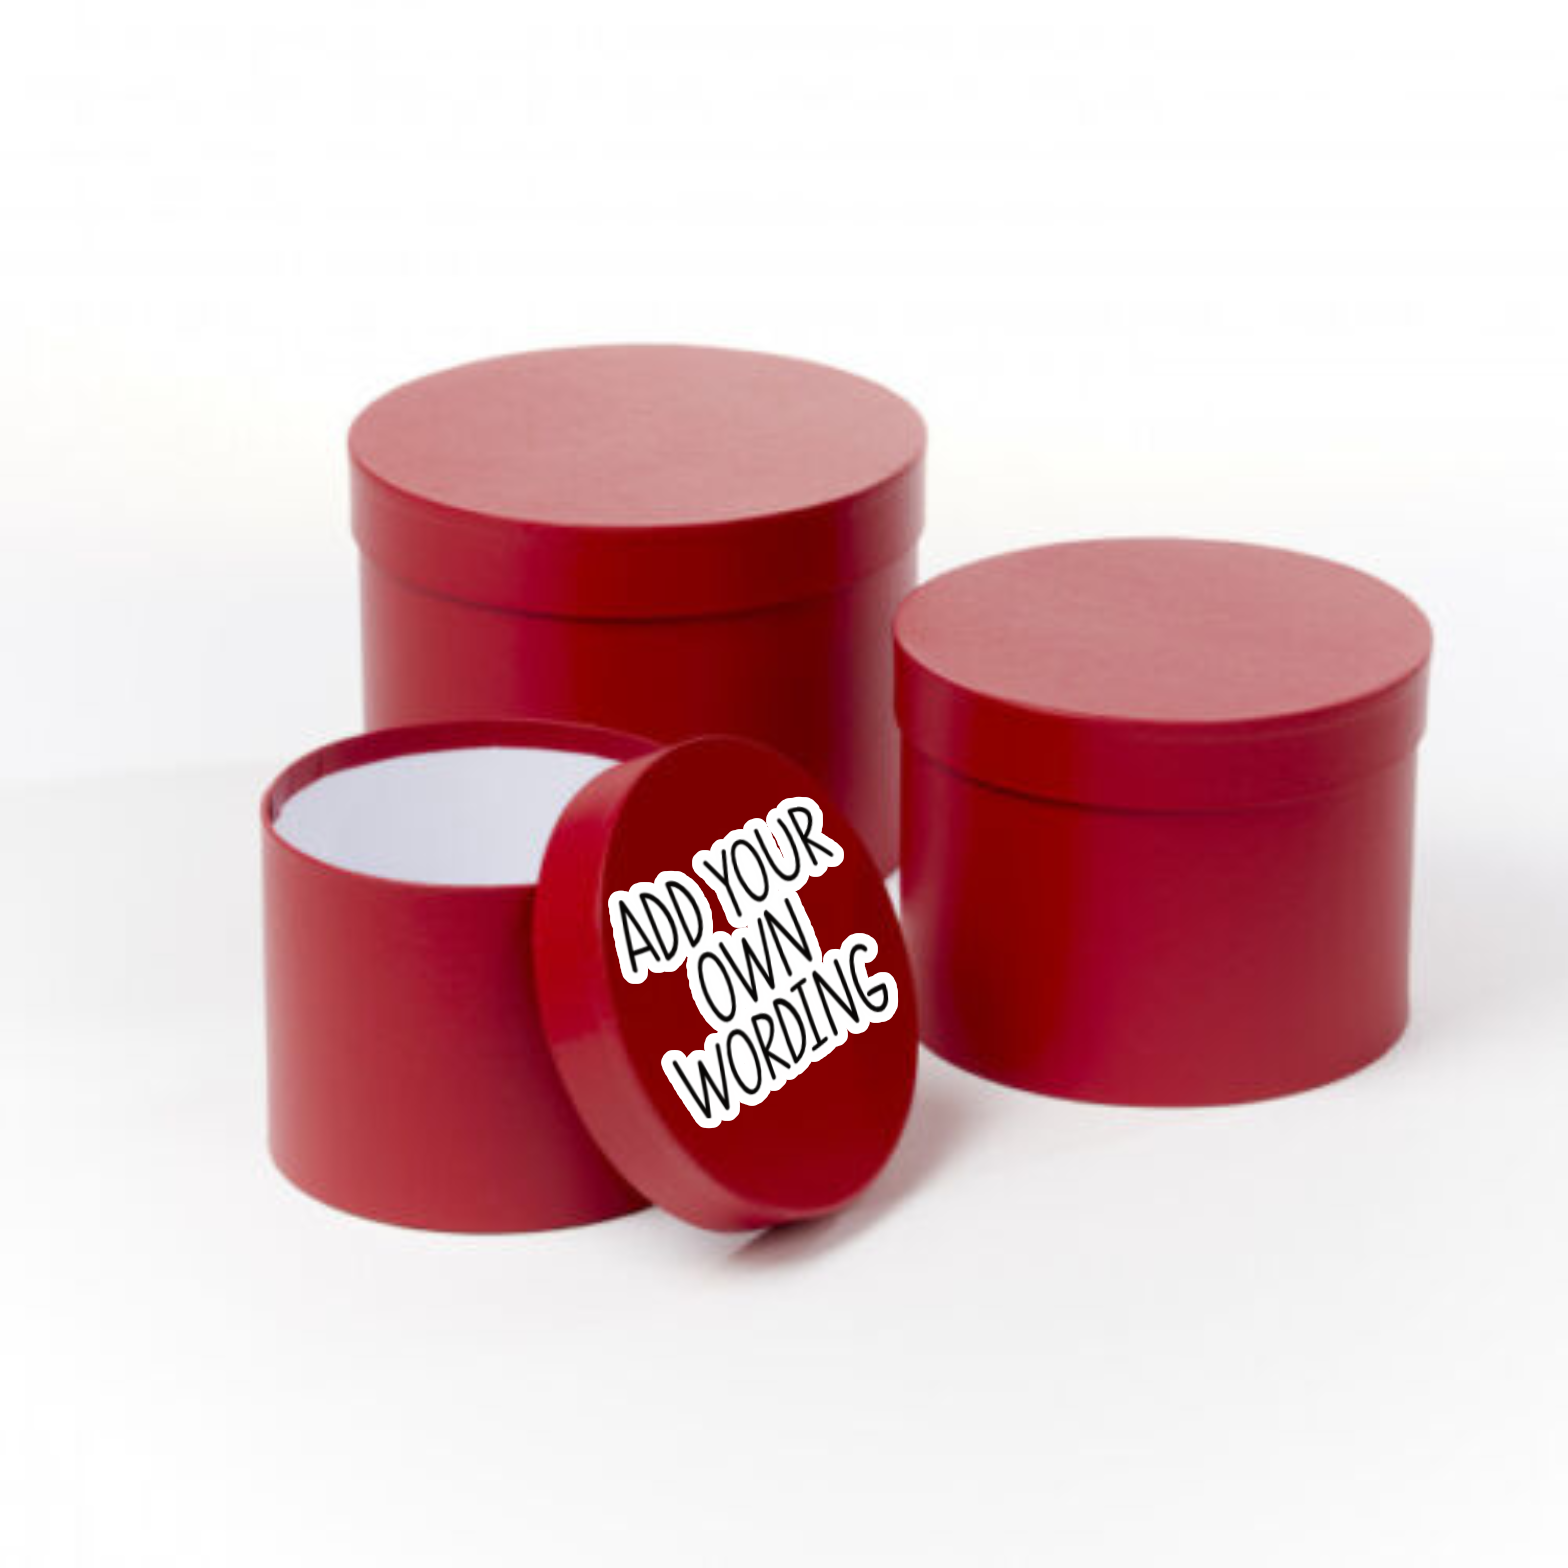 A stack of round red gift boxes with a quote printed to the lid which reads 'add your own wording' in black with a white outline.